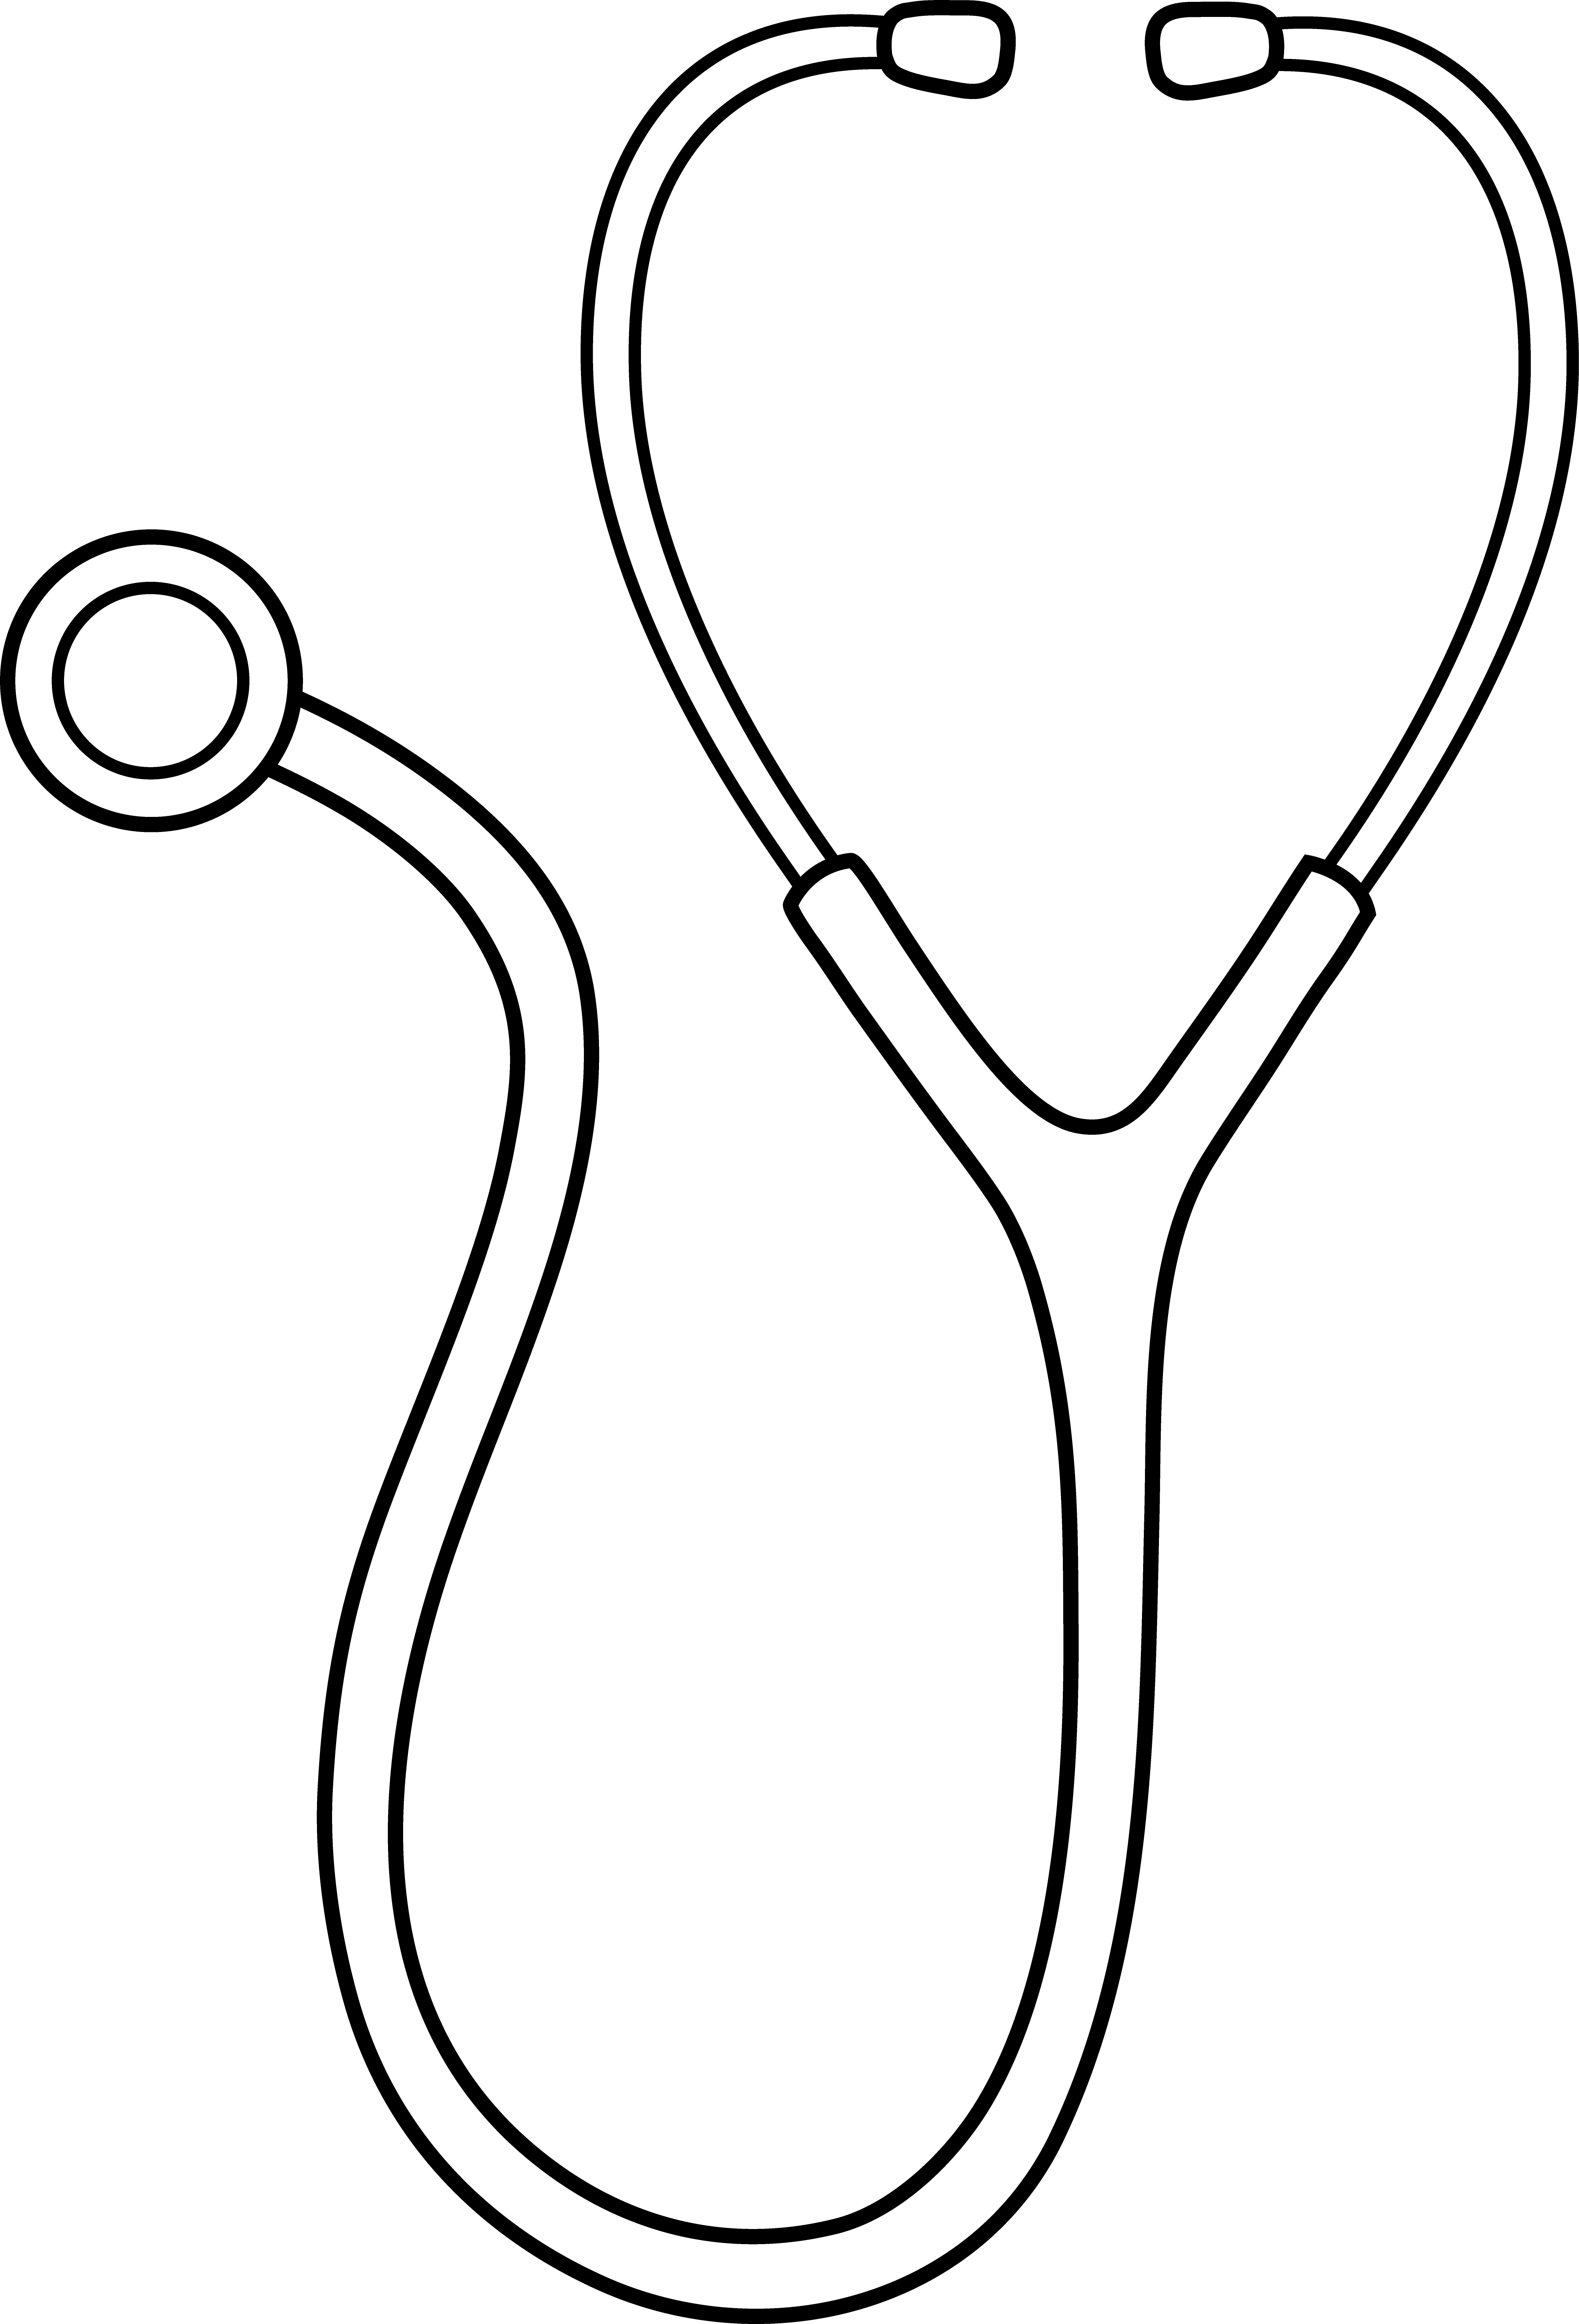 Clipart stethoscope free